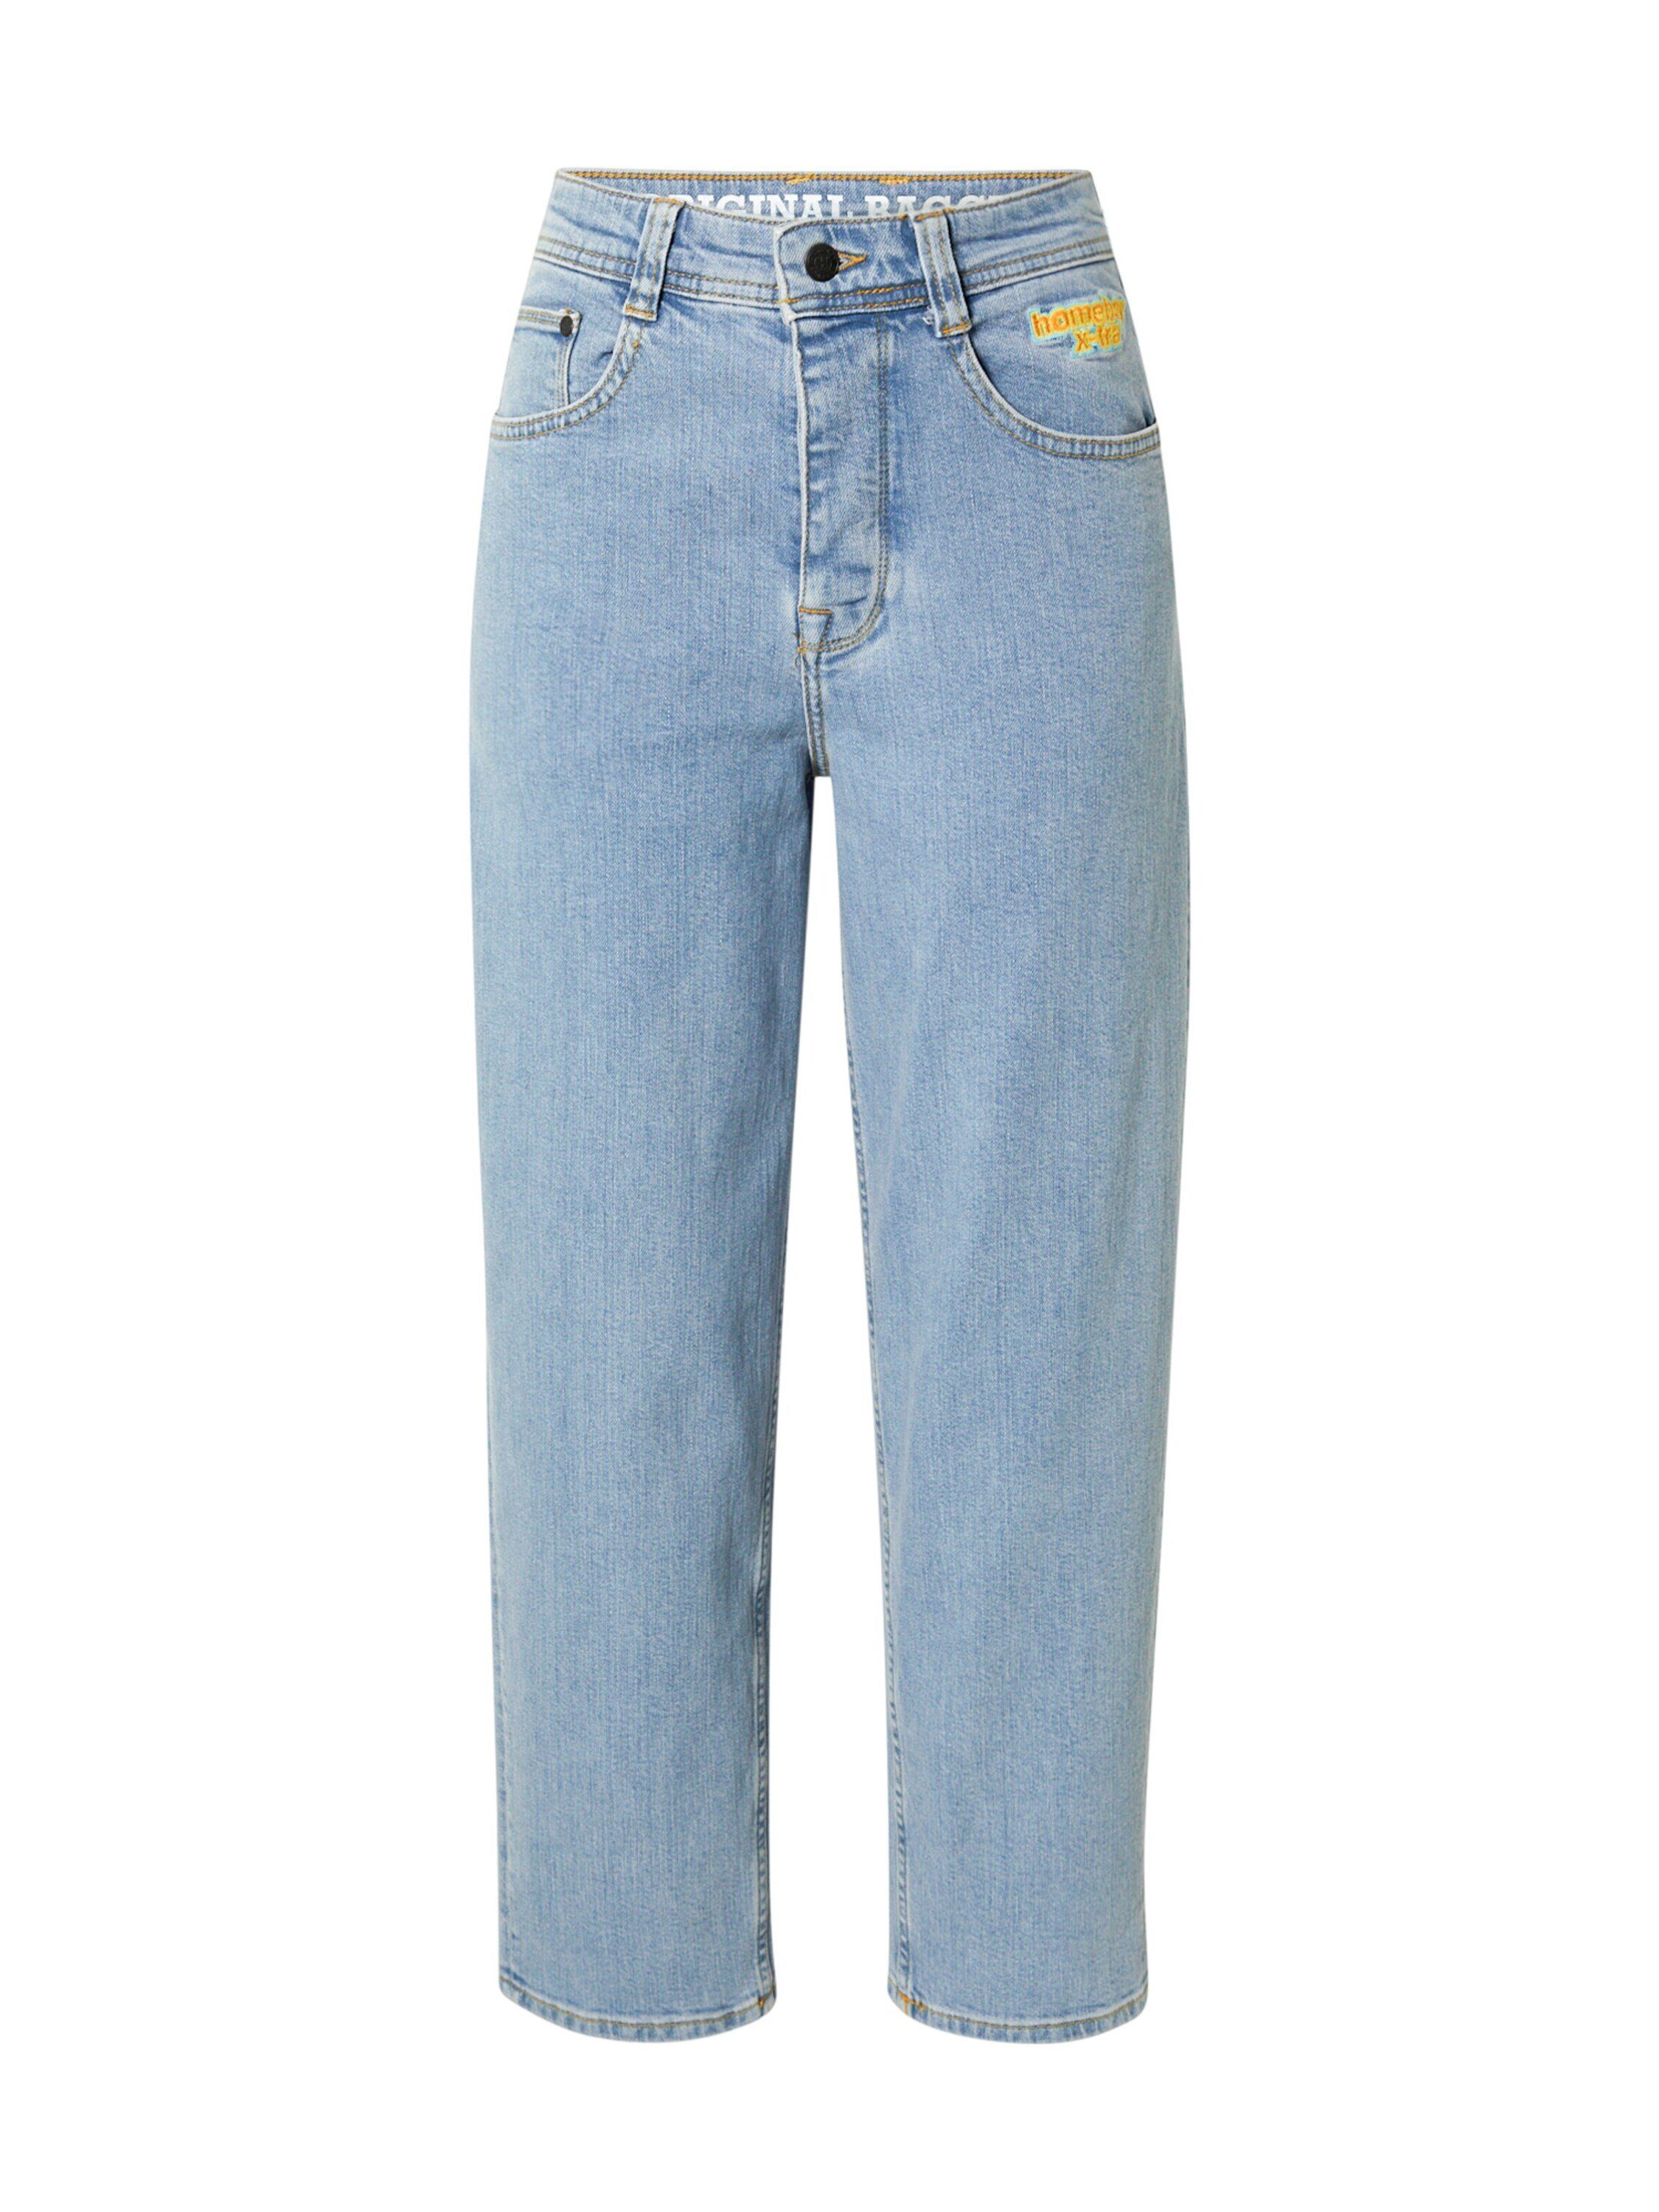 HOMEBOY Loose-fit-Jeans x-tra BAGGY Denim (1-tlg) Stickerei